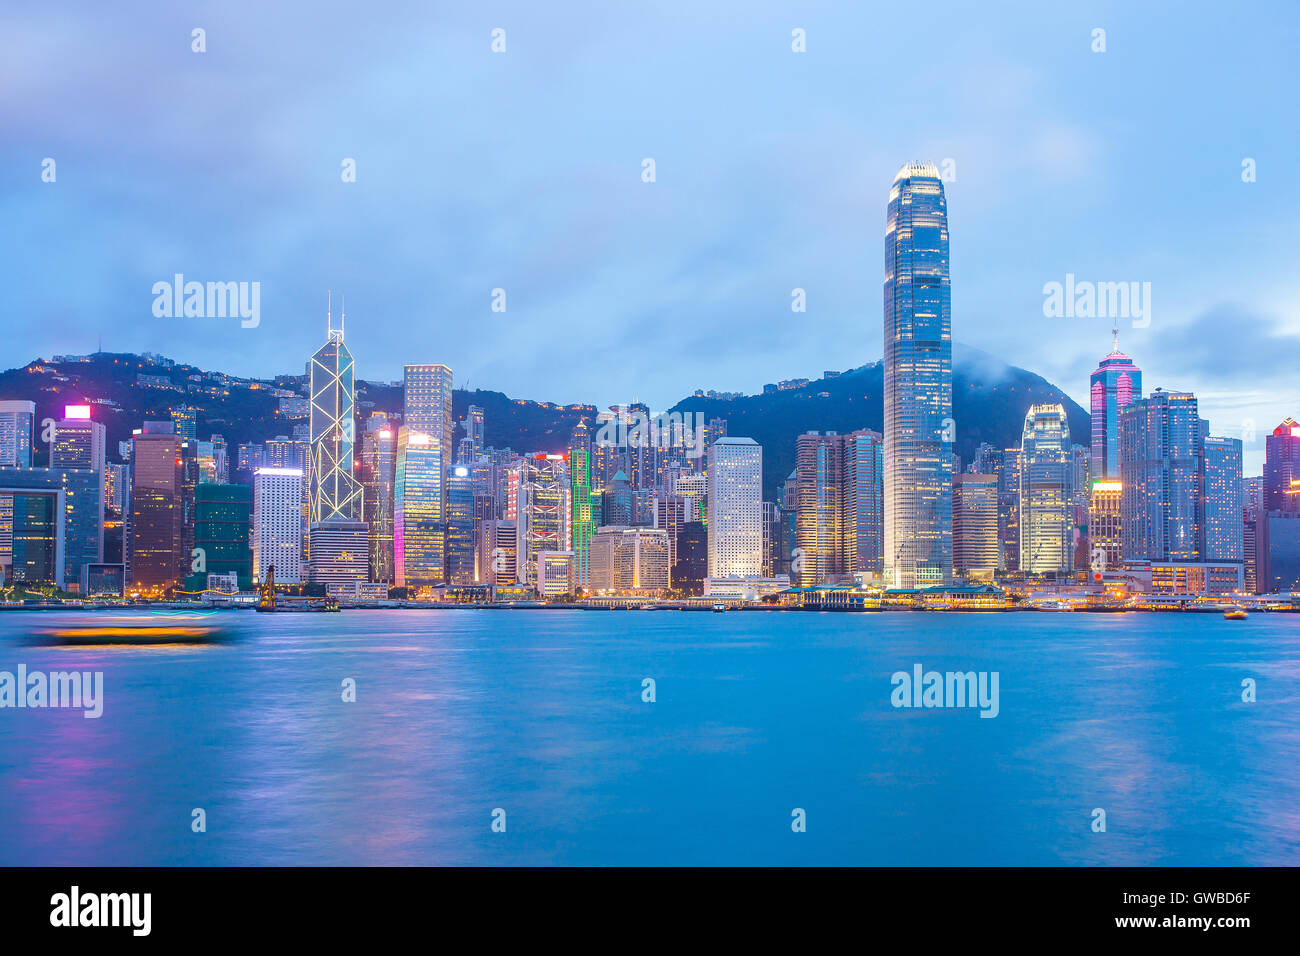 Victoria Harbour view at night in Hong Kong. Stock Photo